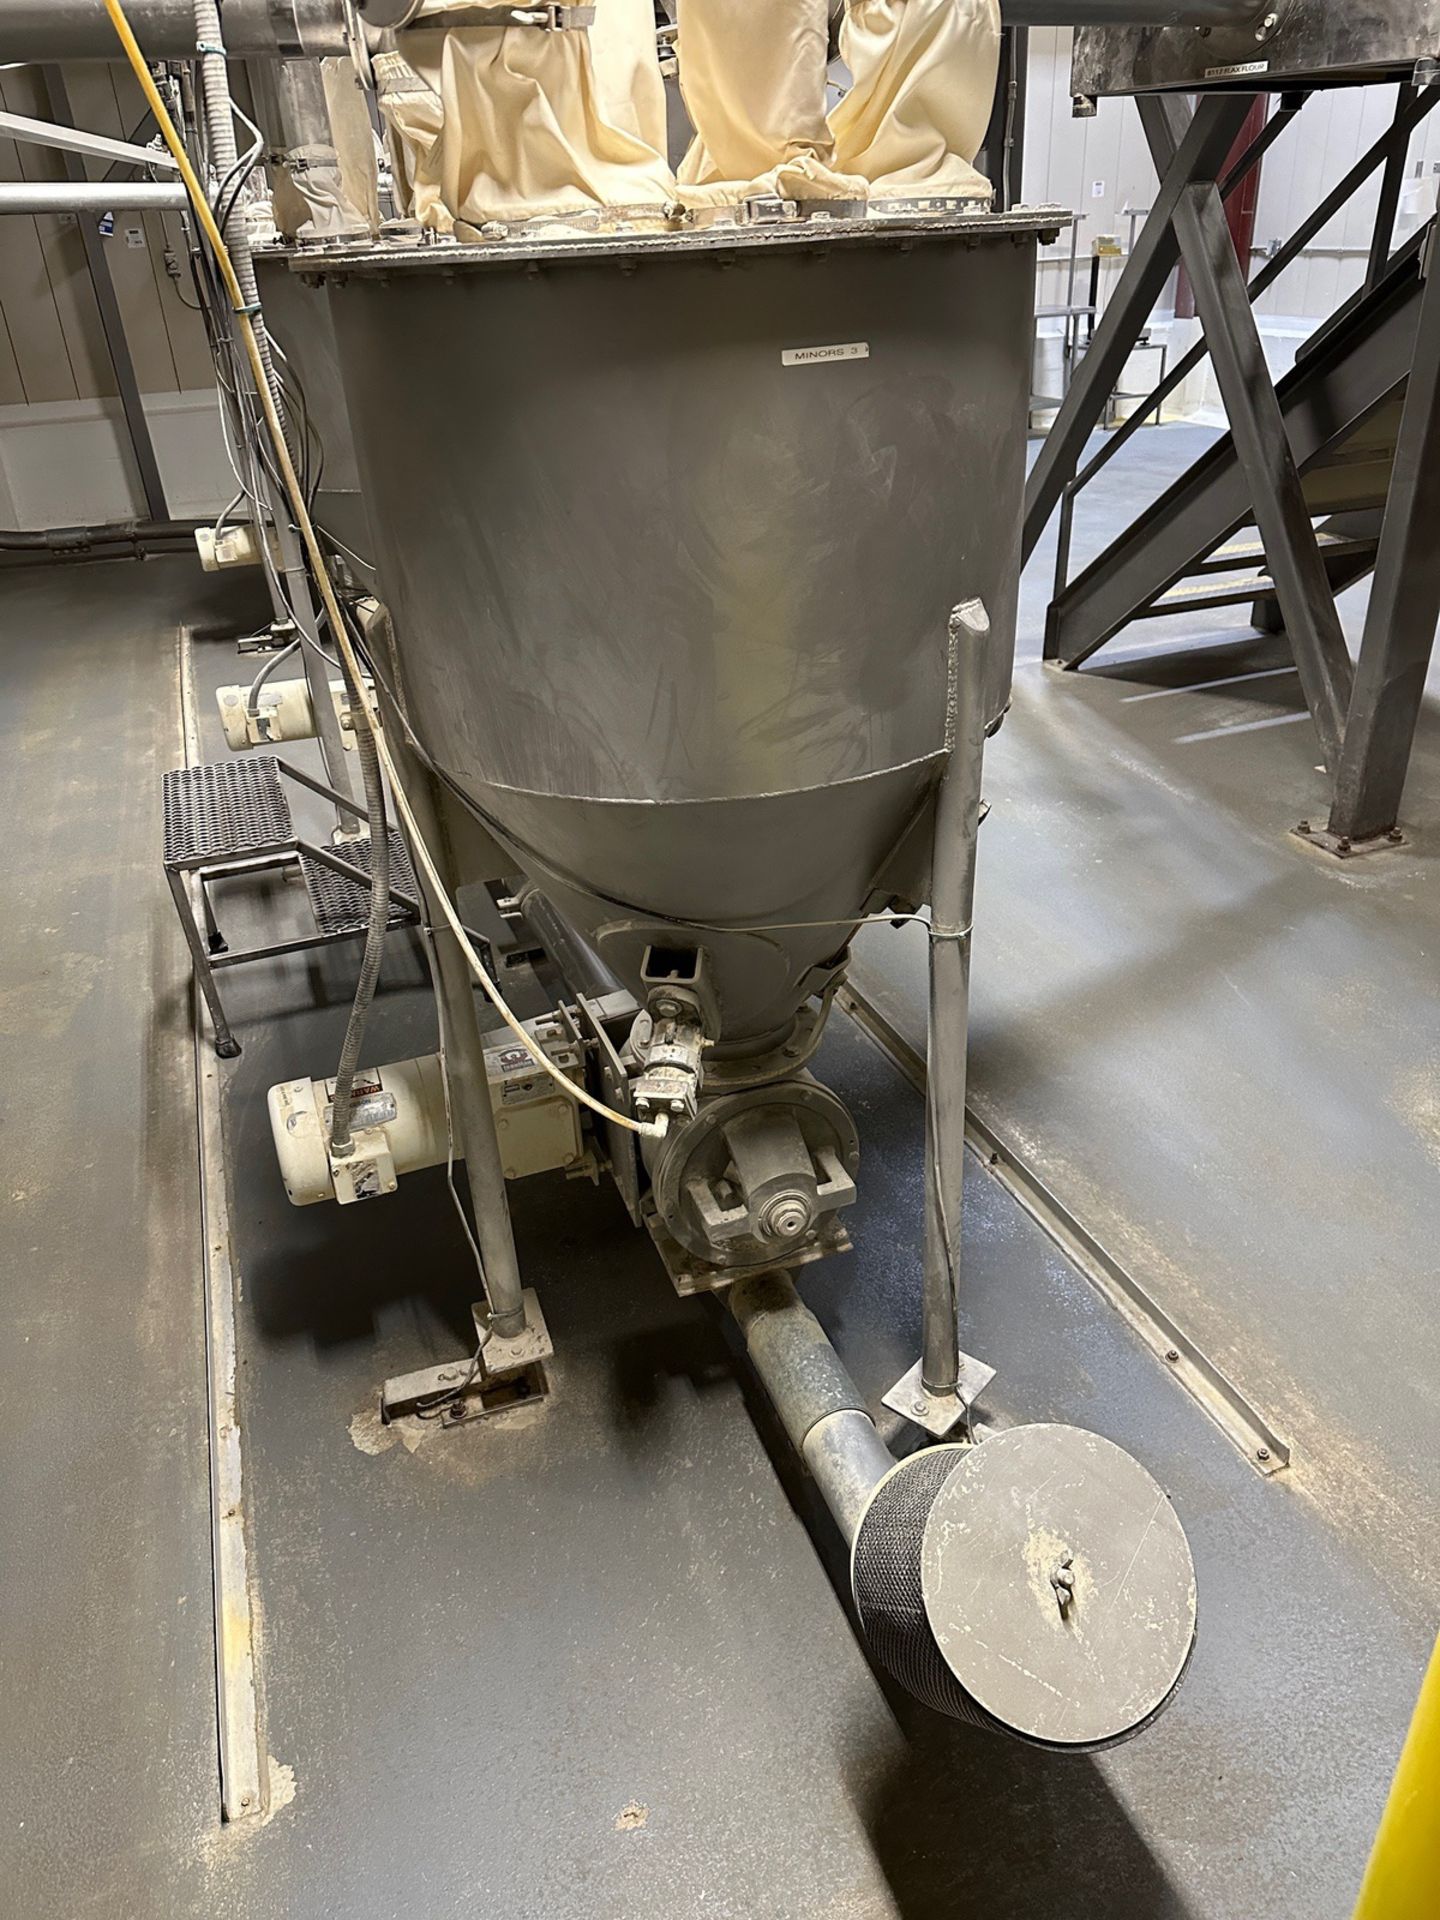 Shick Stainless Steel Hopper on Load Cells with Mettler Toledo DRO and Auger Drive | Rig Fee $500